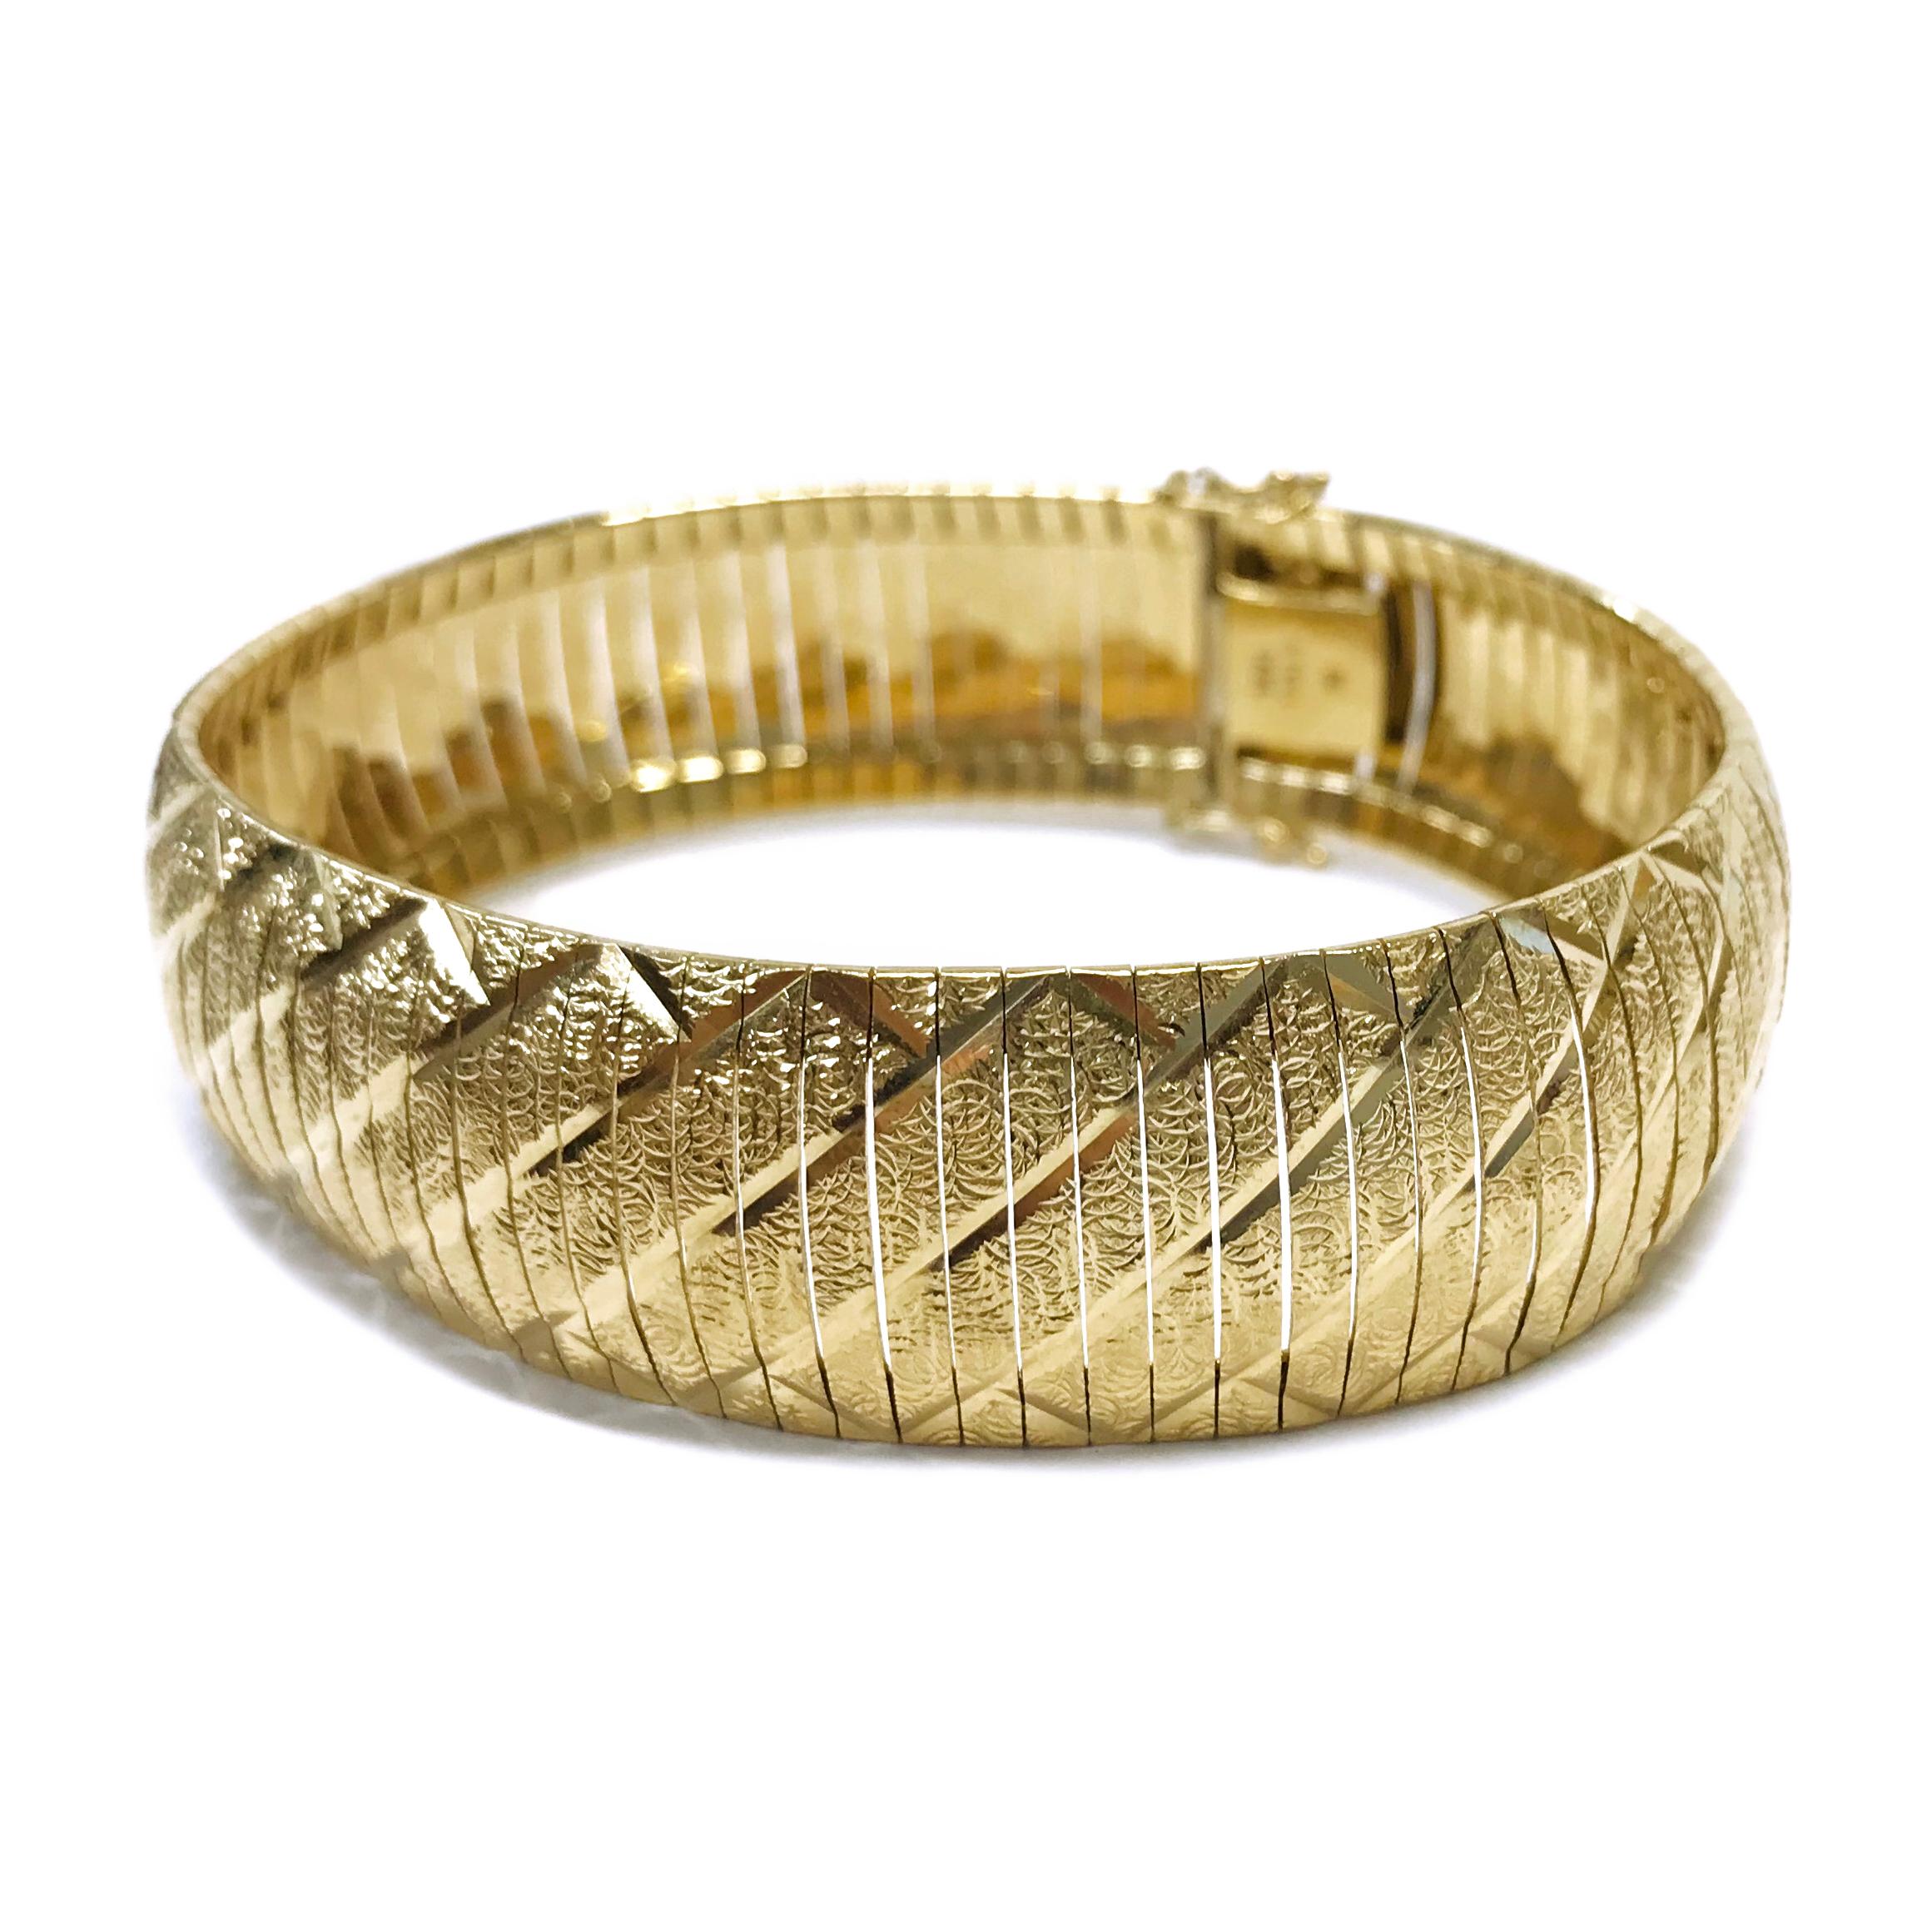 14 Karat Diamond-Cut Cubetto Bracelet. The bracelet consists of individual flexible gold bars, diamond-cut and smooth. Stamped on the inside of the clasp is 14K ITALY MI, the Italian maker's mark from Milano, Italy. The bracelet is 17mm wide and 7